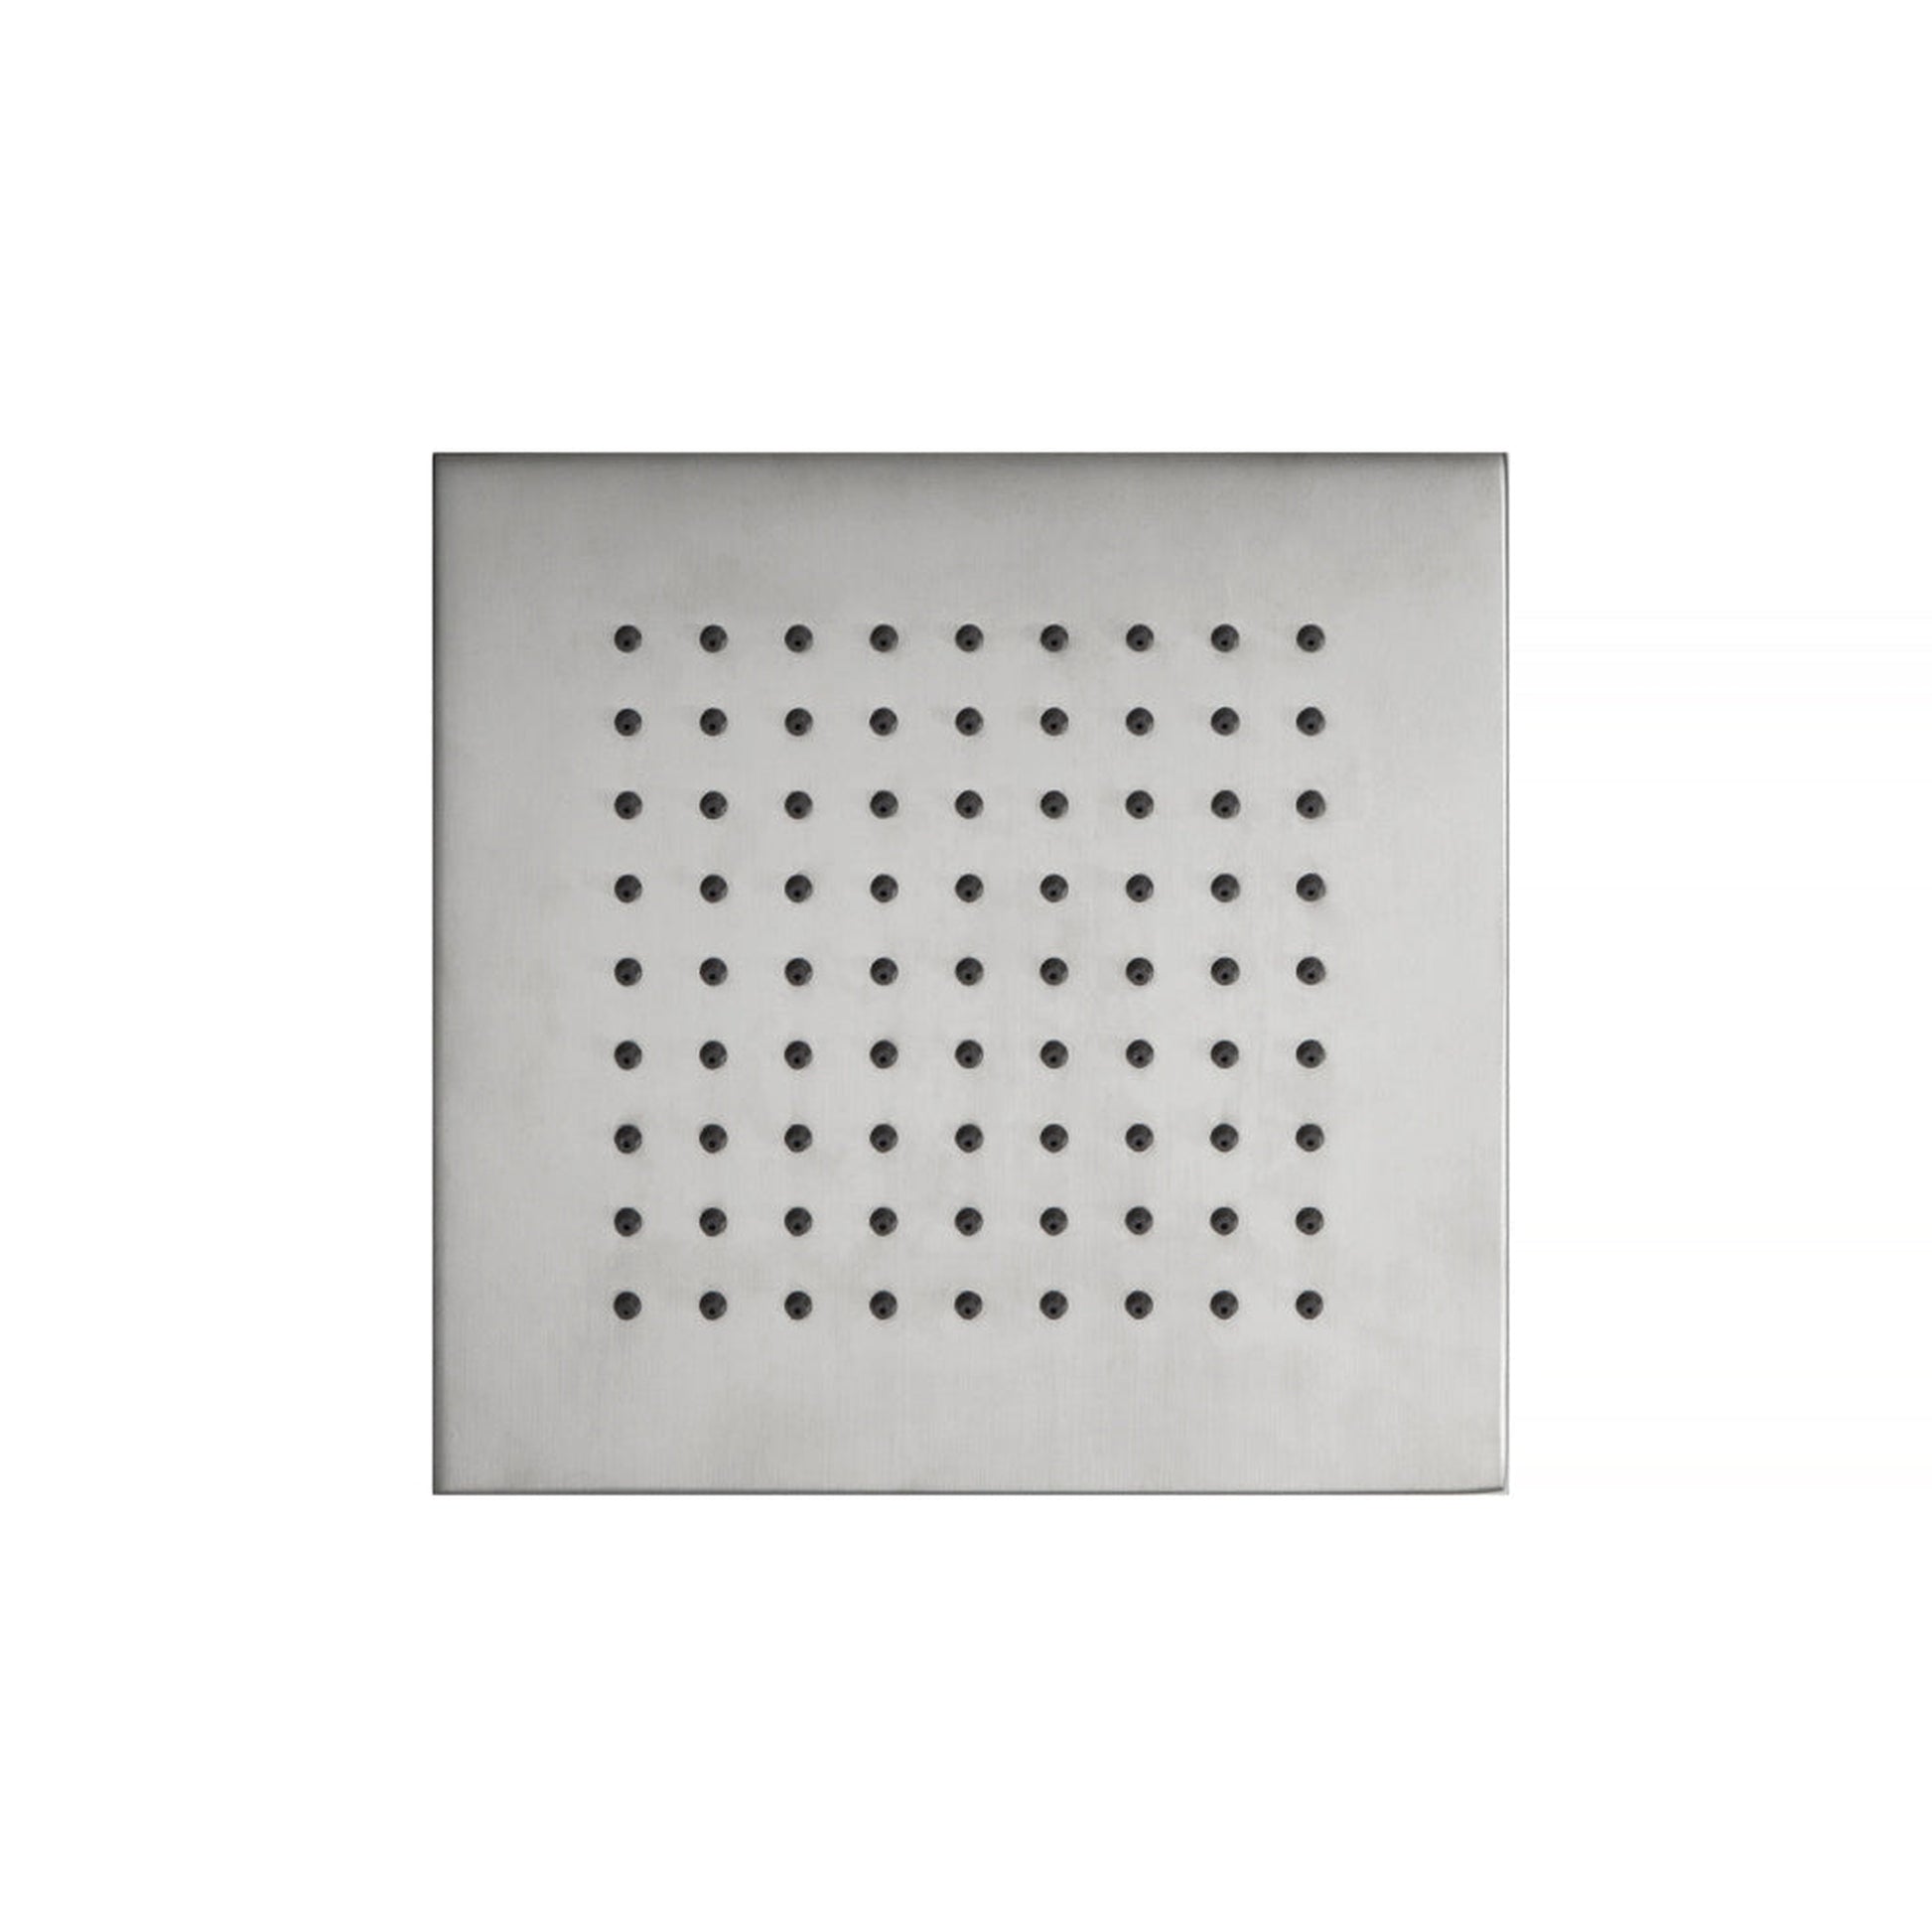 Isenberg Universal Fixtures 6" Single Function Square Brushed Nickel PVD Solid Brass Rain Shower Head